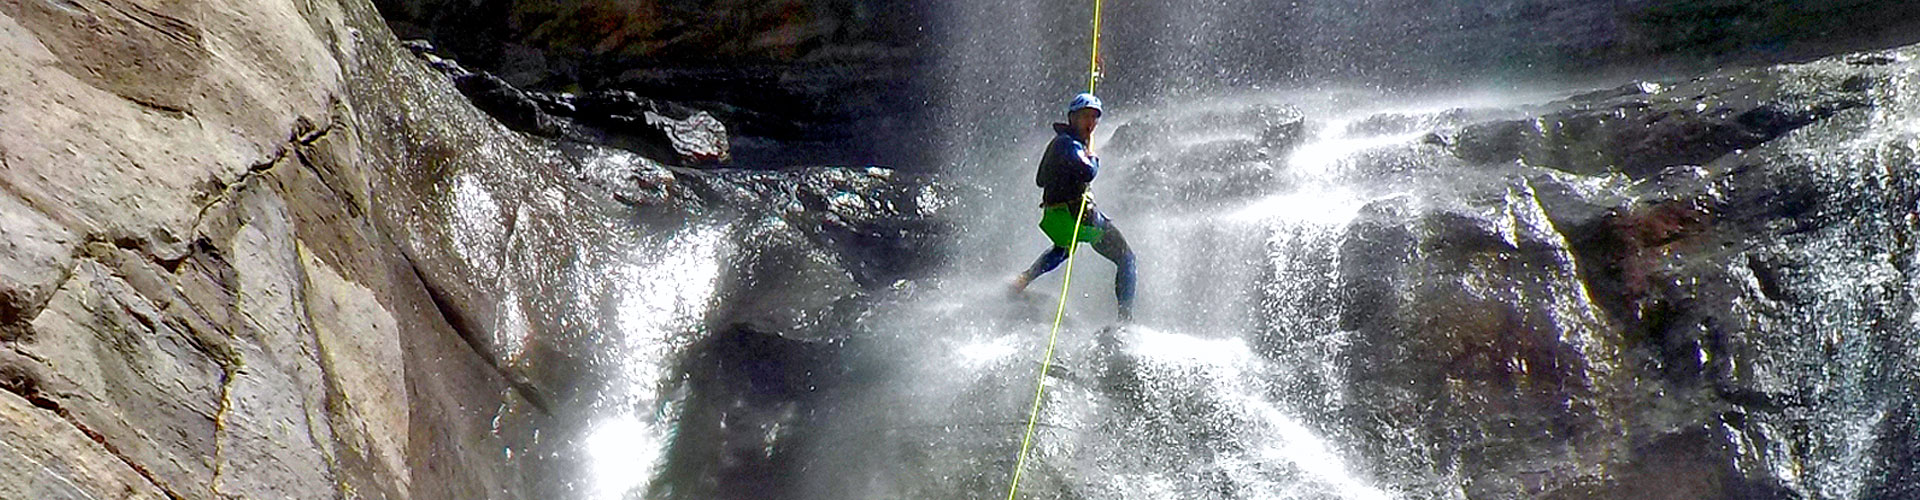 Canyoning & Rappelling Tours